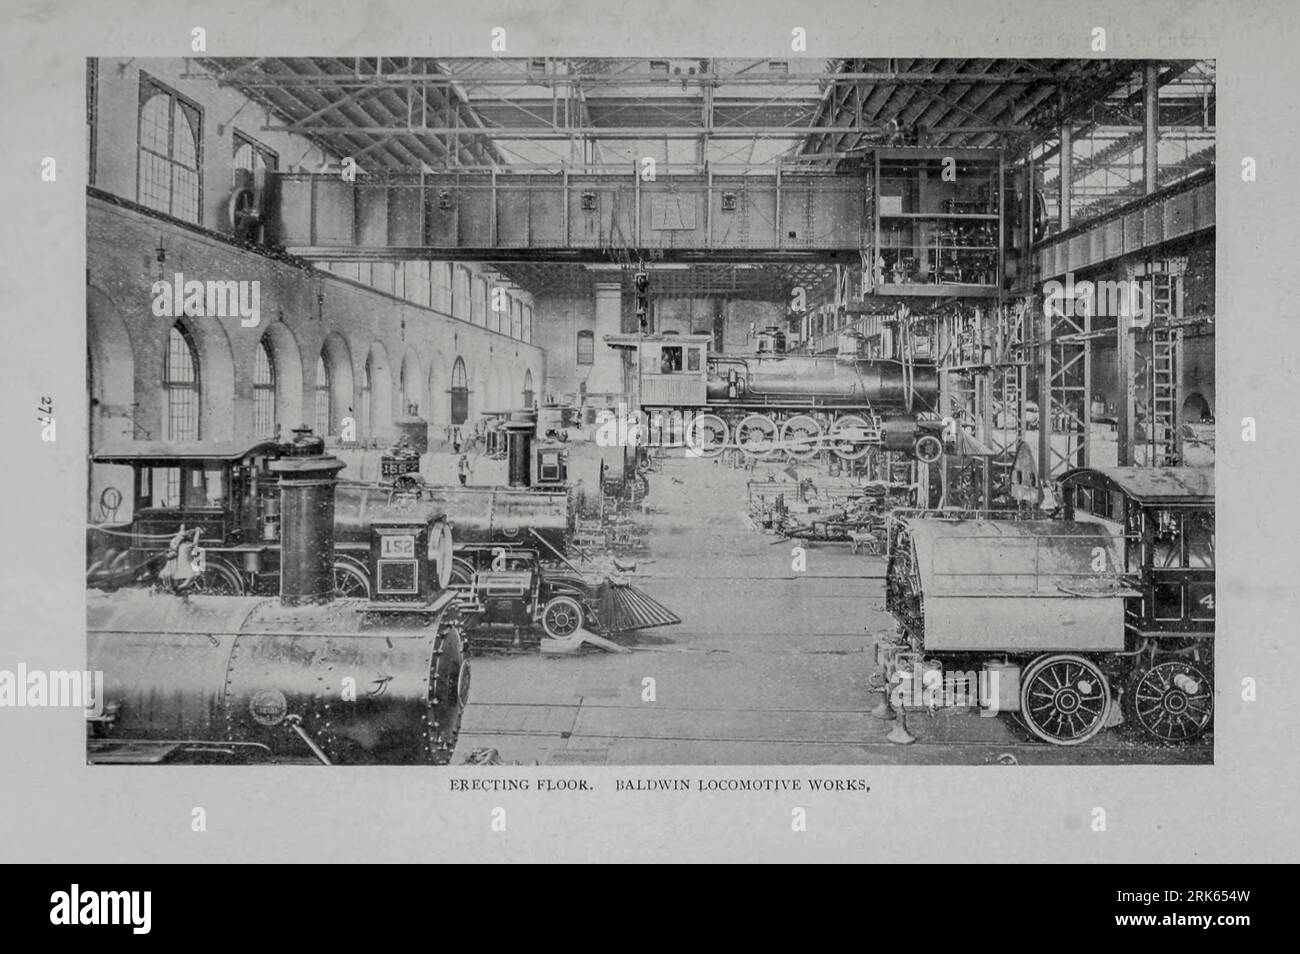 Erecting Floor Baldwin Locomotive Works from the Article MODERN MACHINE-SHOP ECONOMICS PRIME REQUISITES OF SHOP CONSTRUCTION By Horace L. Arnold from The Engineering Magazine DEVOTED TO INDUSTRIAL PROGRESS Volume XI October 1896 NEW YORK The Engineering Magazine Co Stock Photo